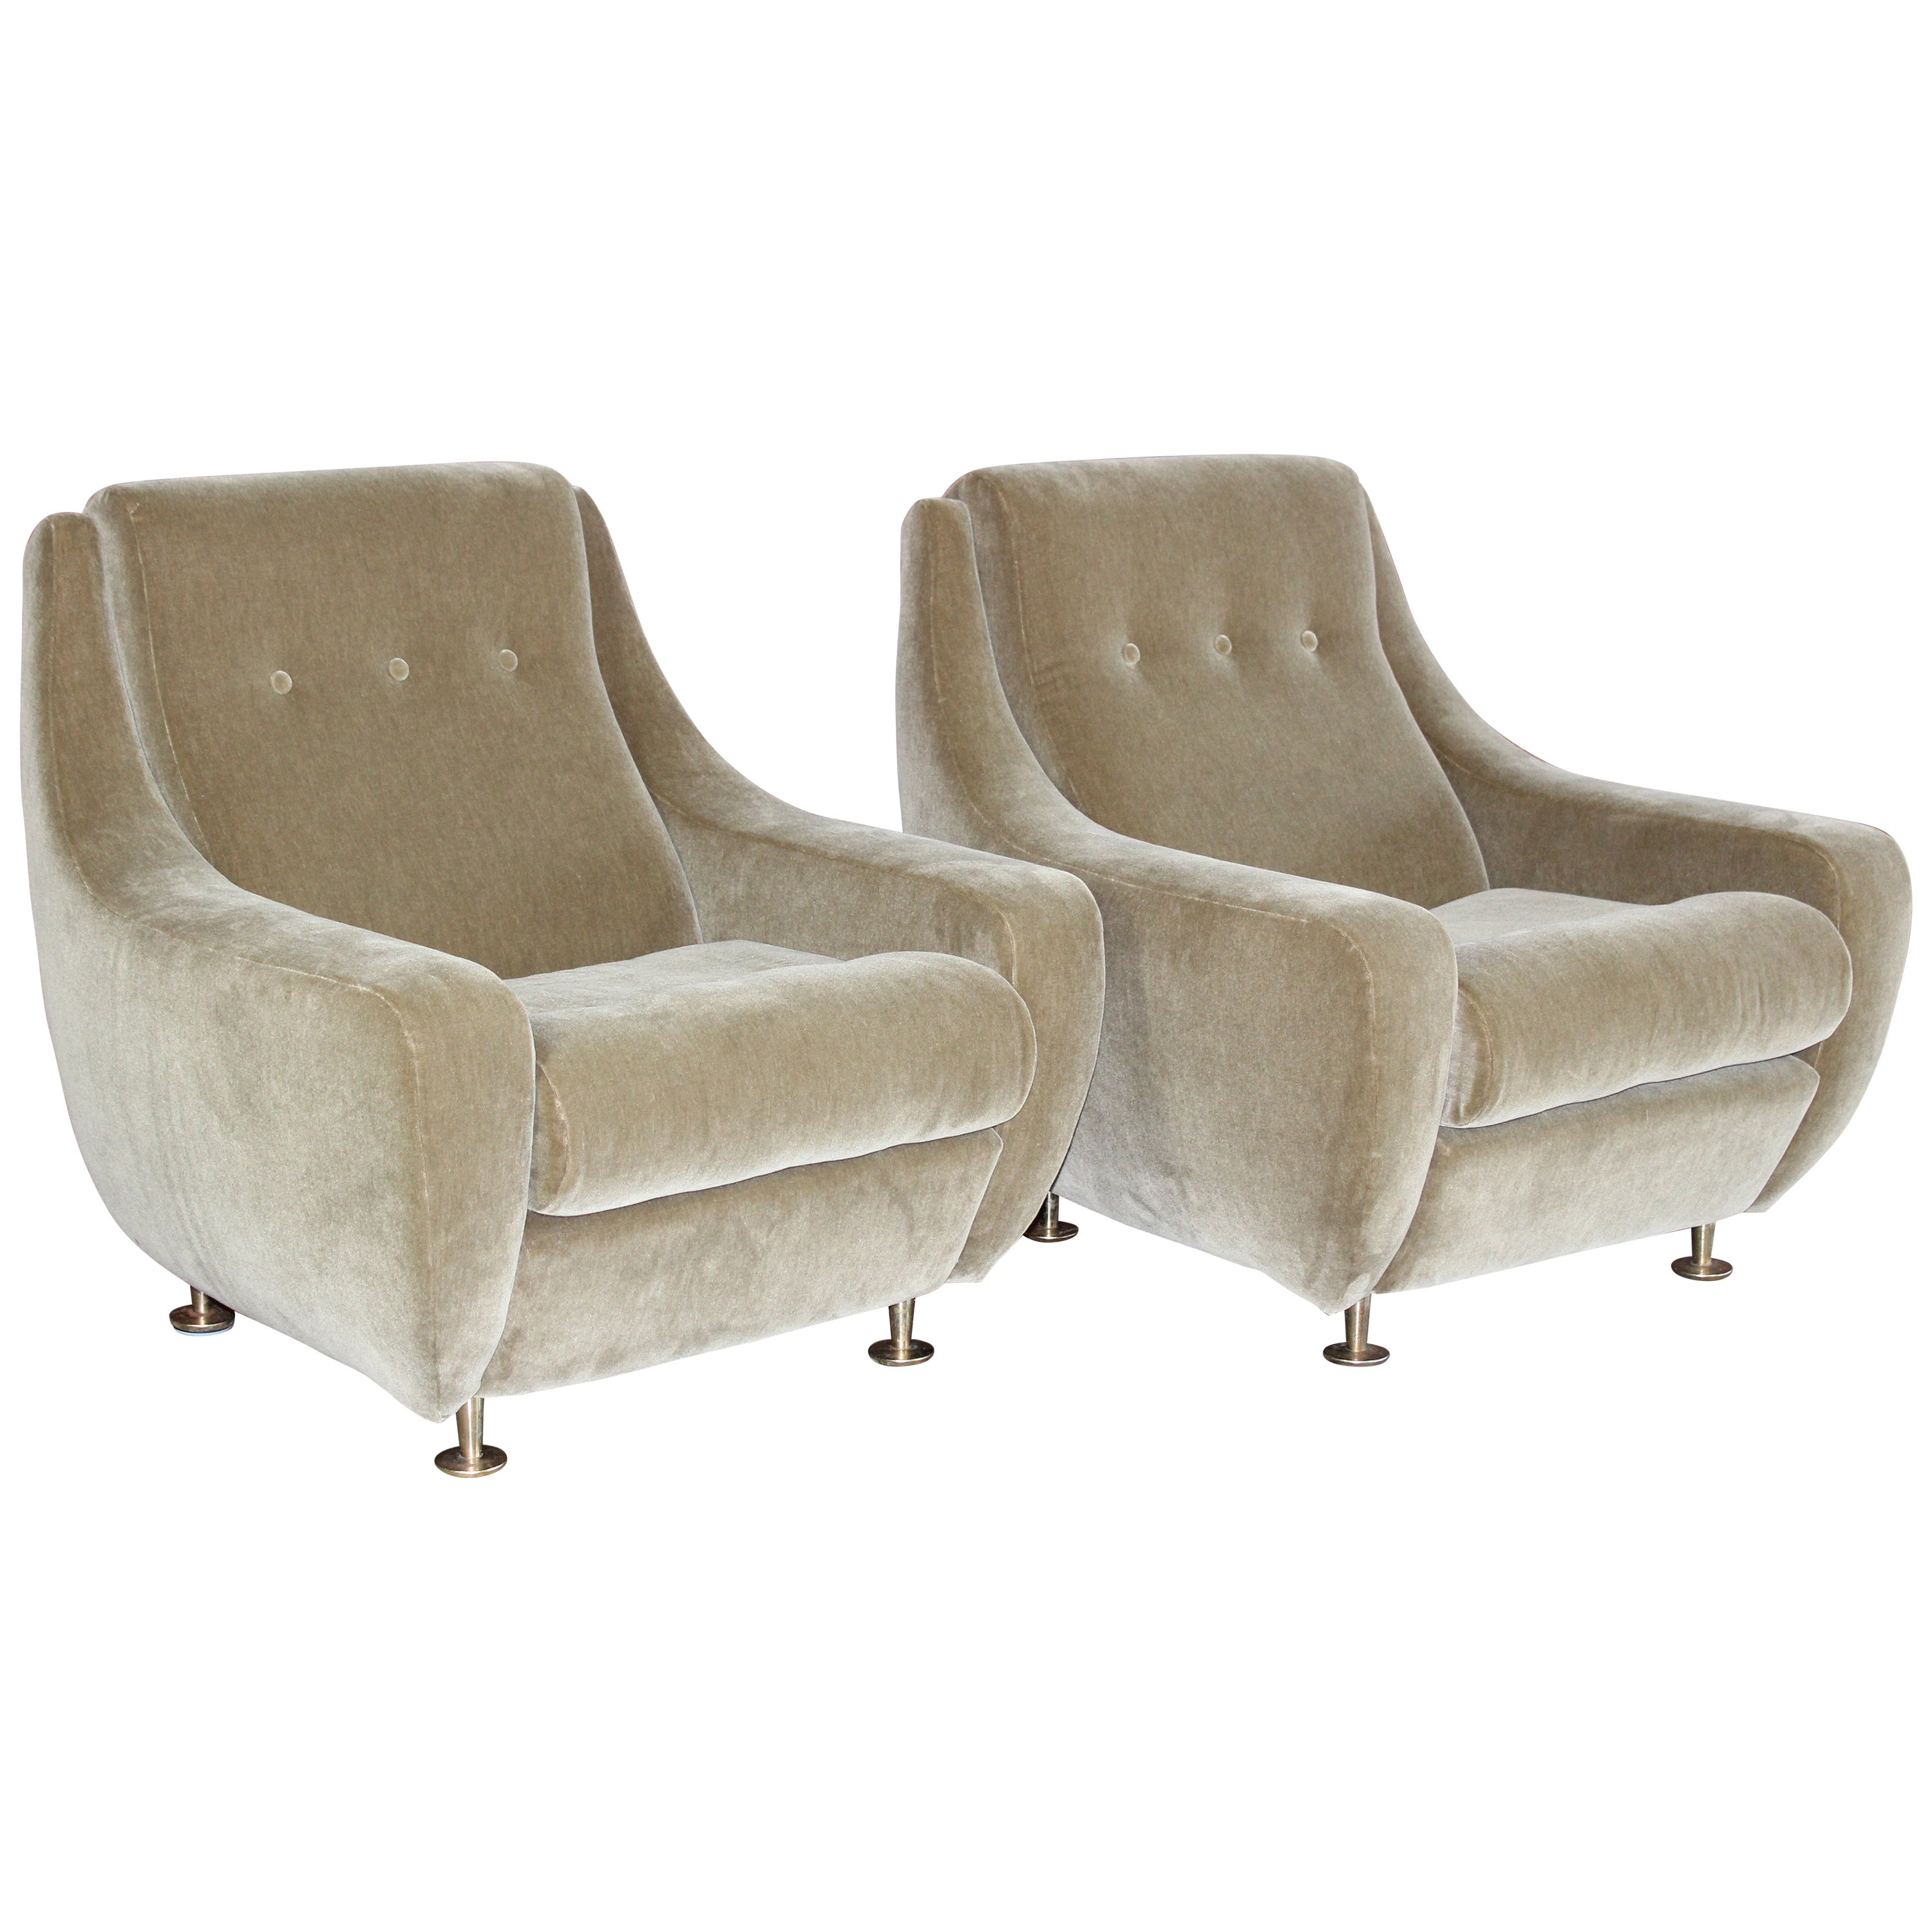 Pair of Lounge Chairs in the Style of Marco Zanuso for Arflex, Italy, 1960s